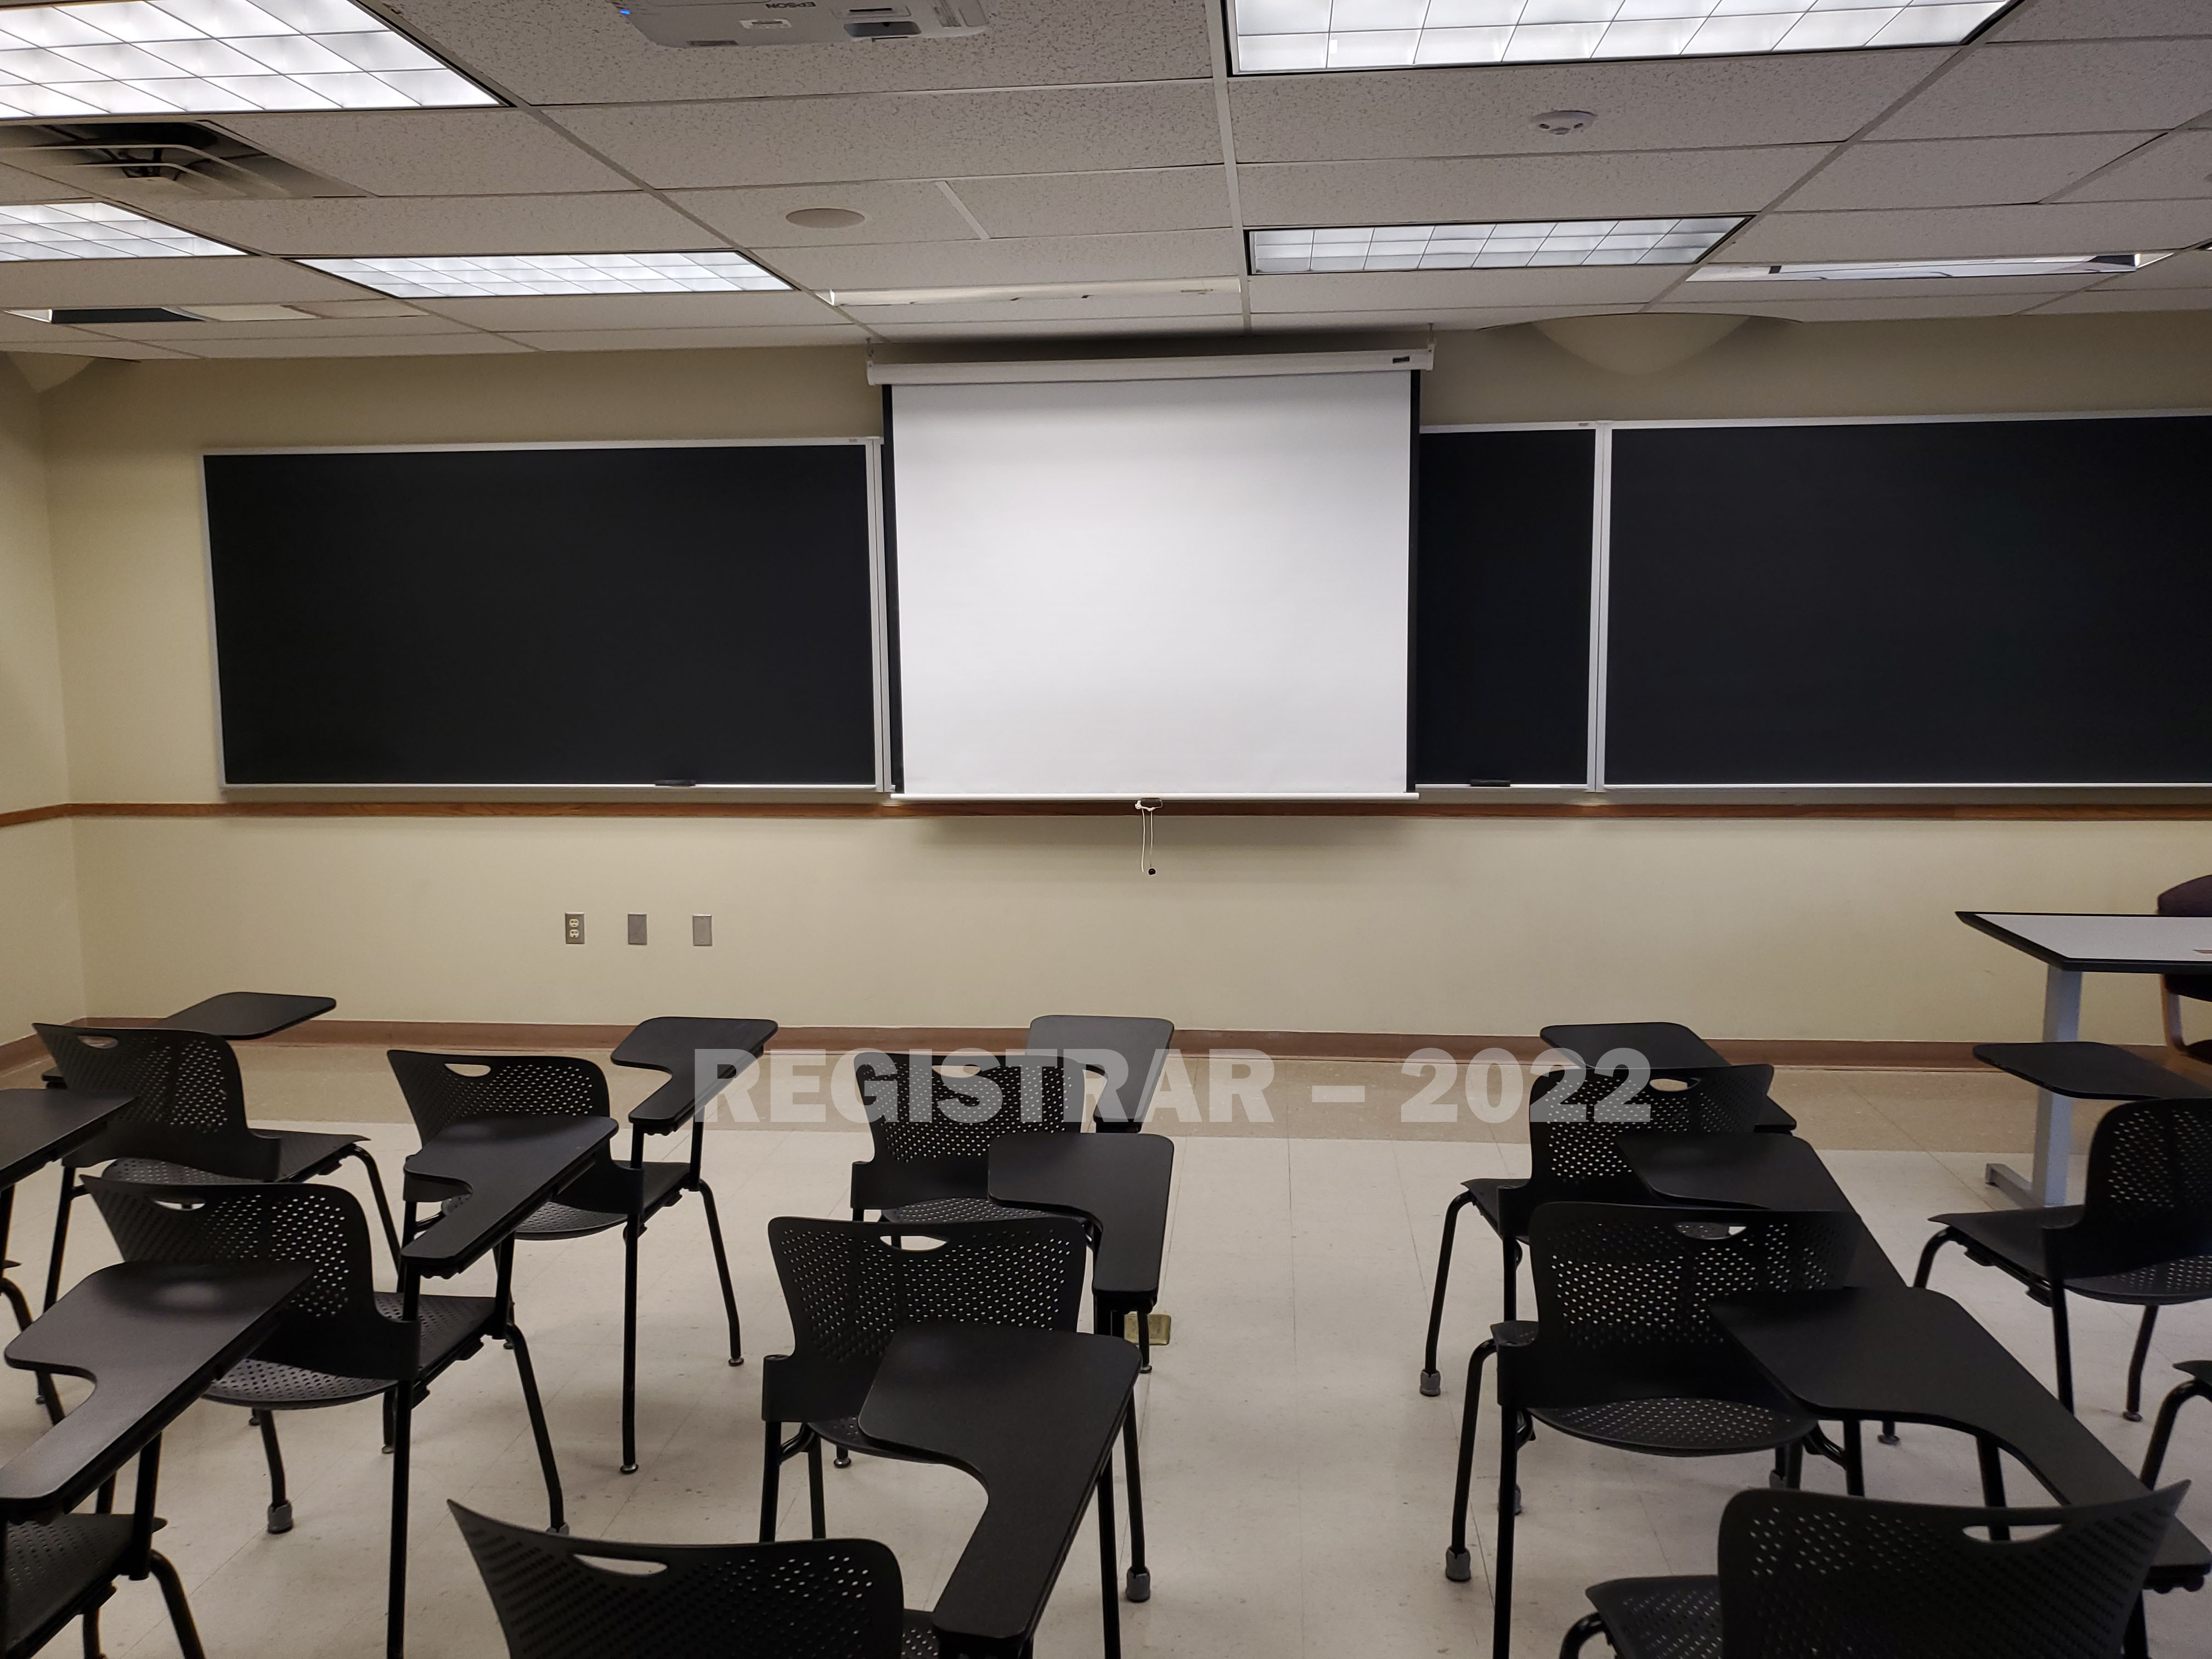 Enarson Classroom Building room 226 view from the back of the room with projector screen down